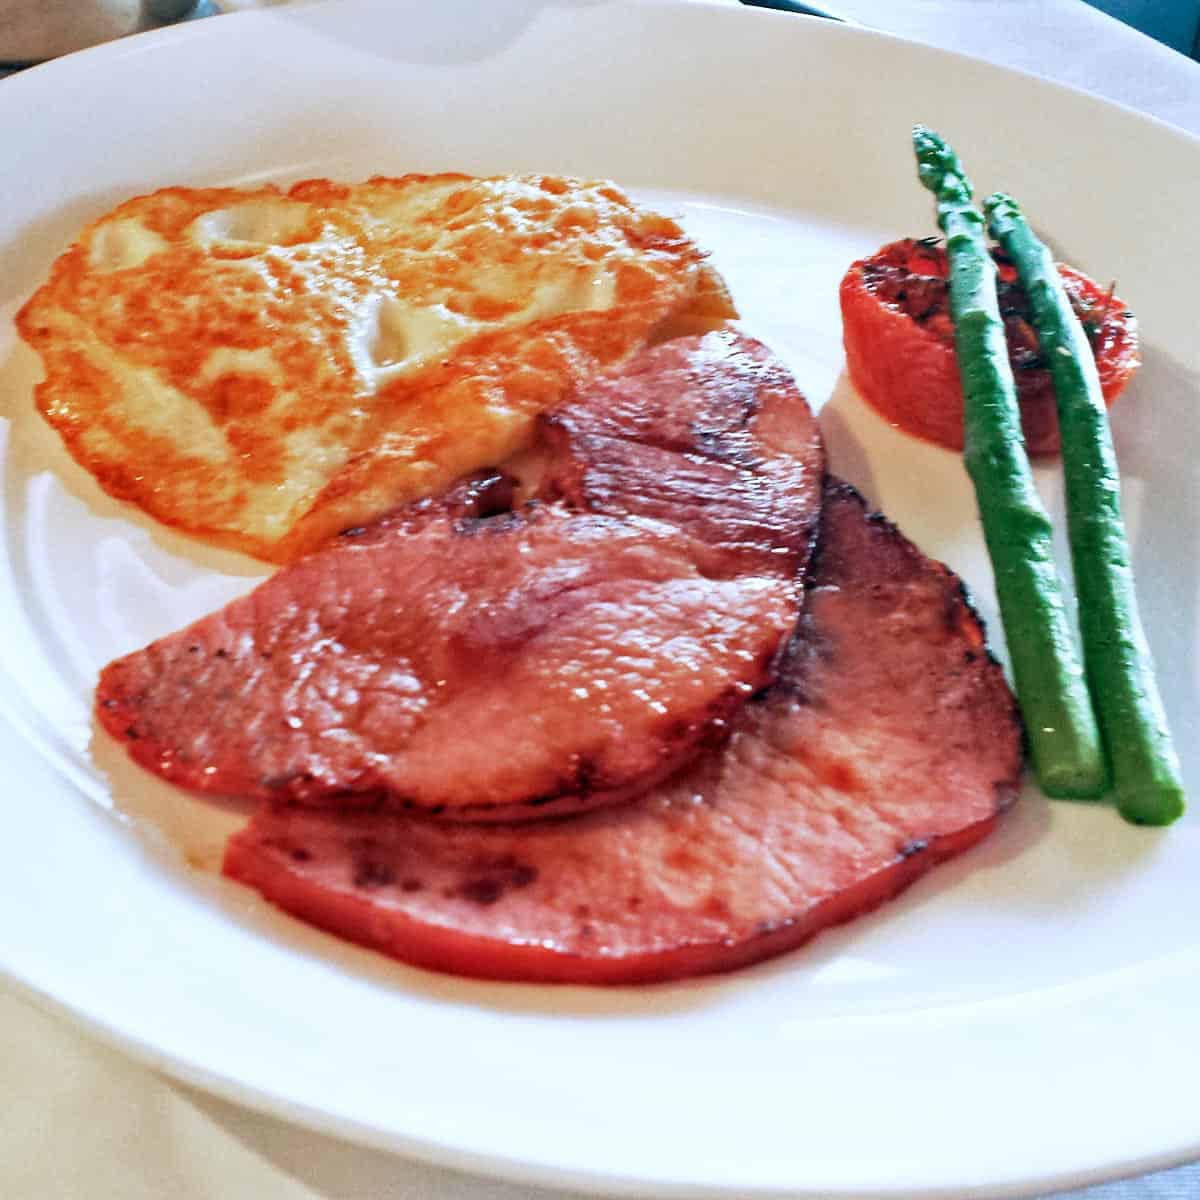 Ham steaks are served for breakfast with fried eggs, a broiled tomato, and steamed asparagus.